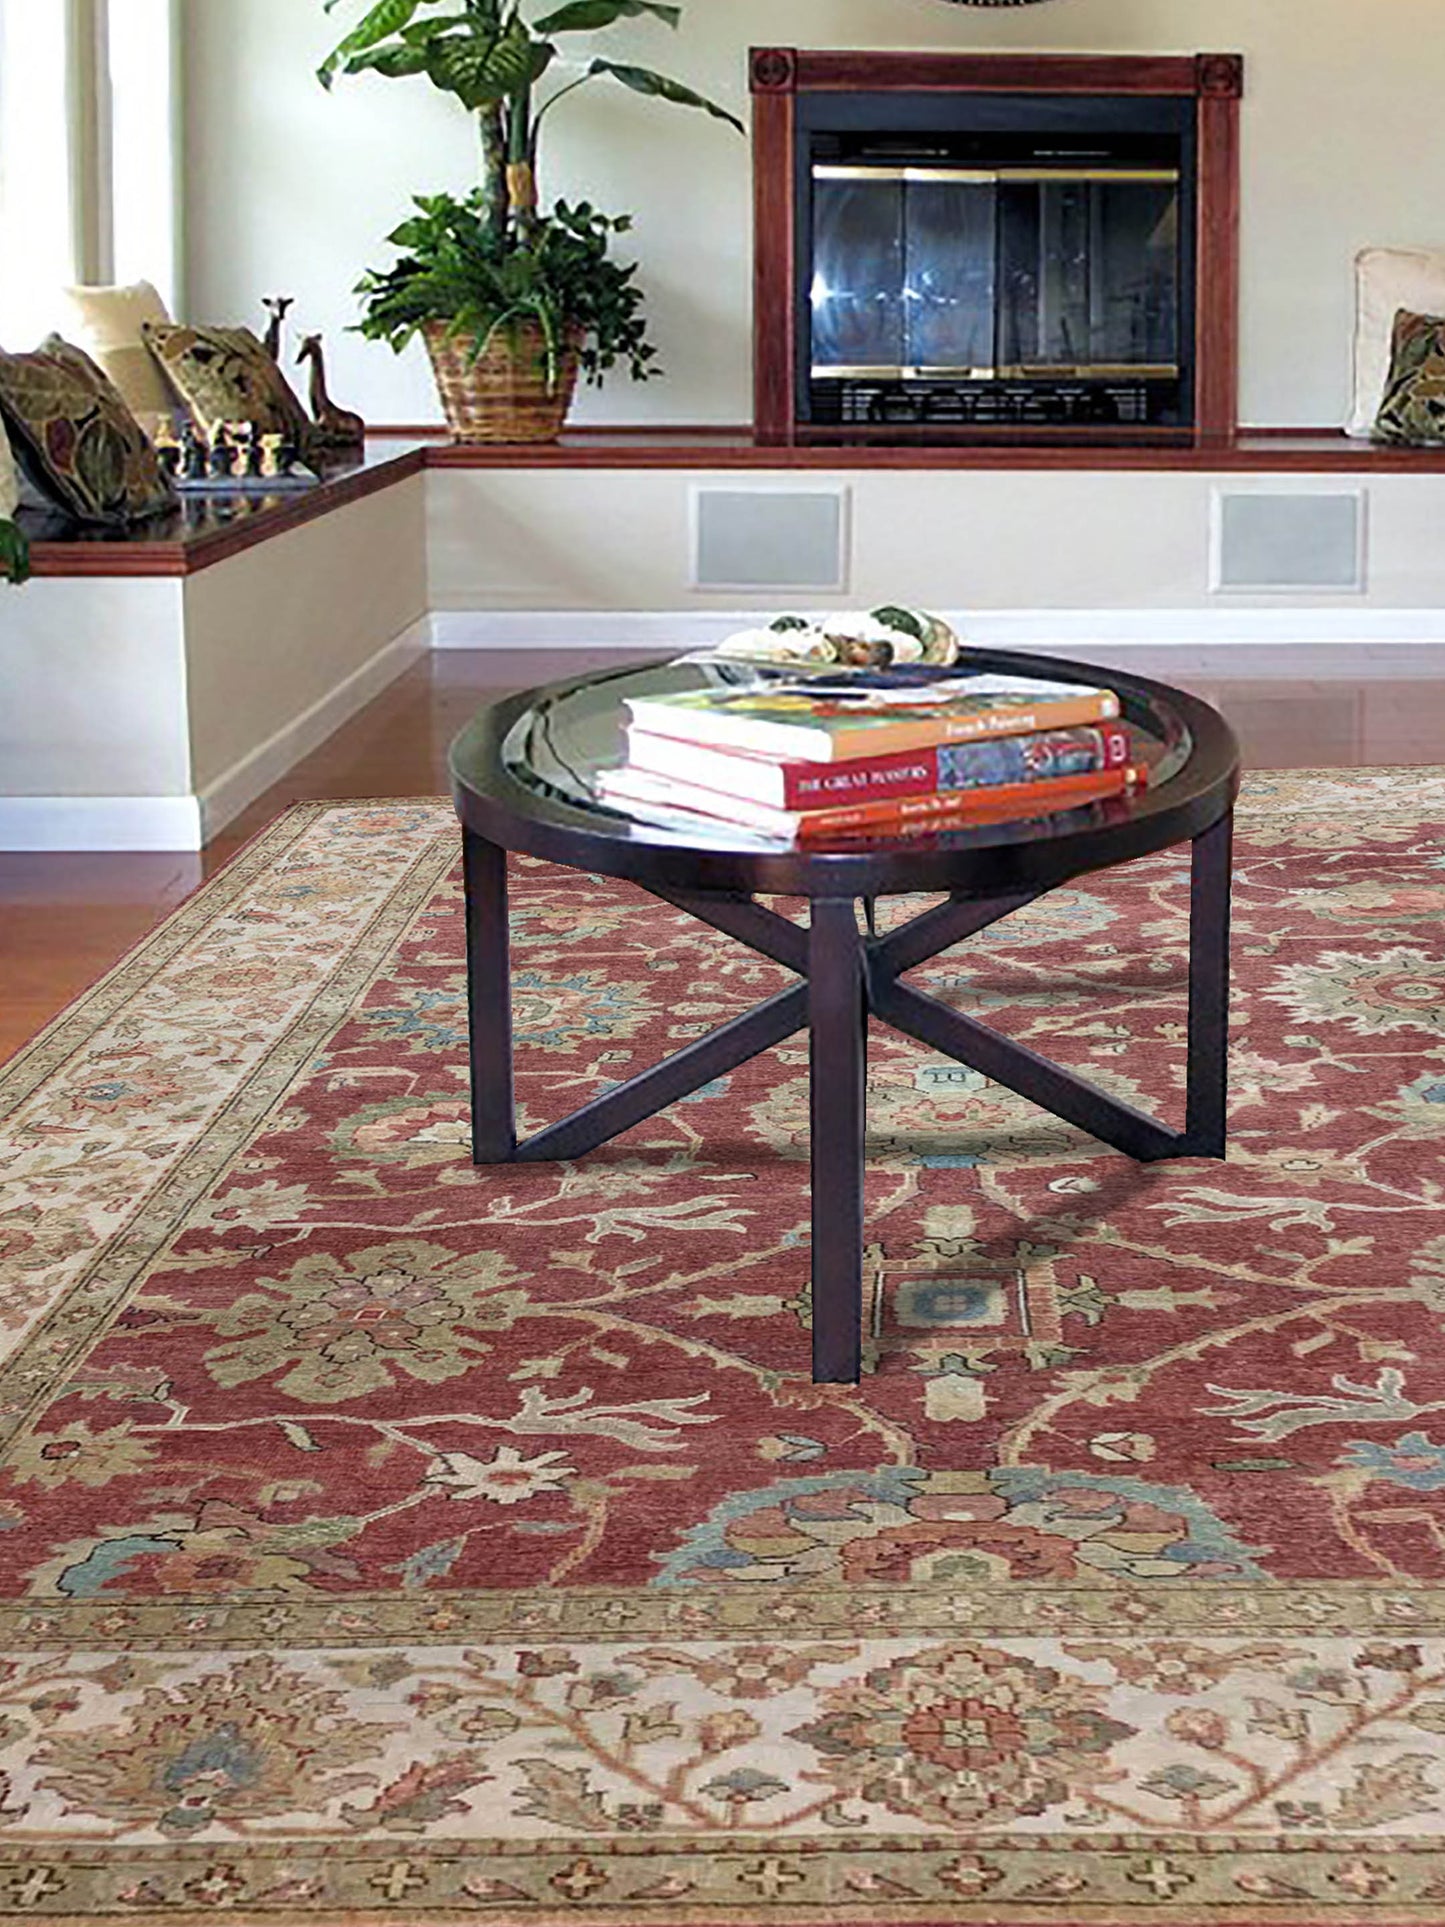 Artisan Cameron  Rust Ivory Traditional Knotted Rug